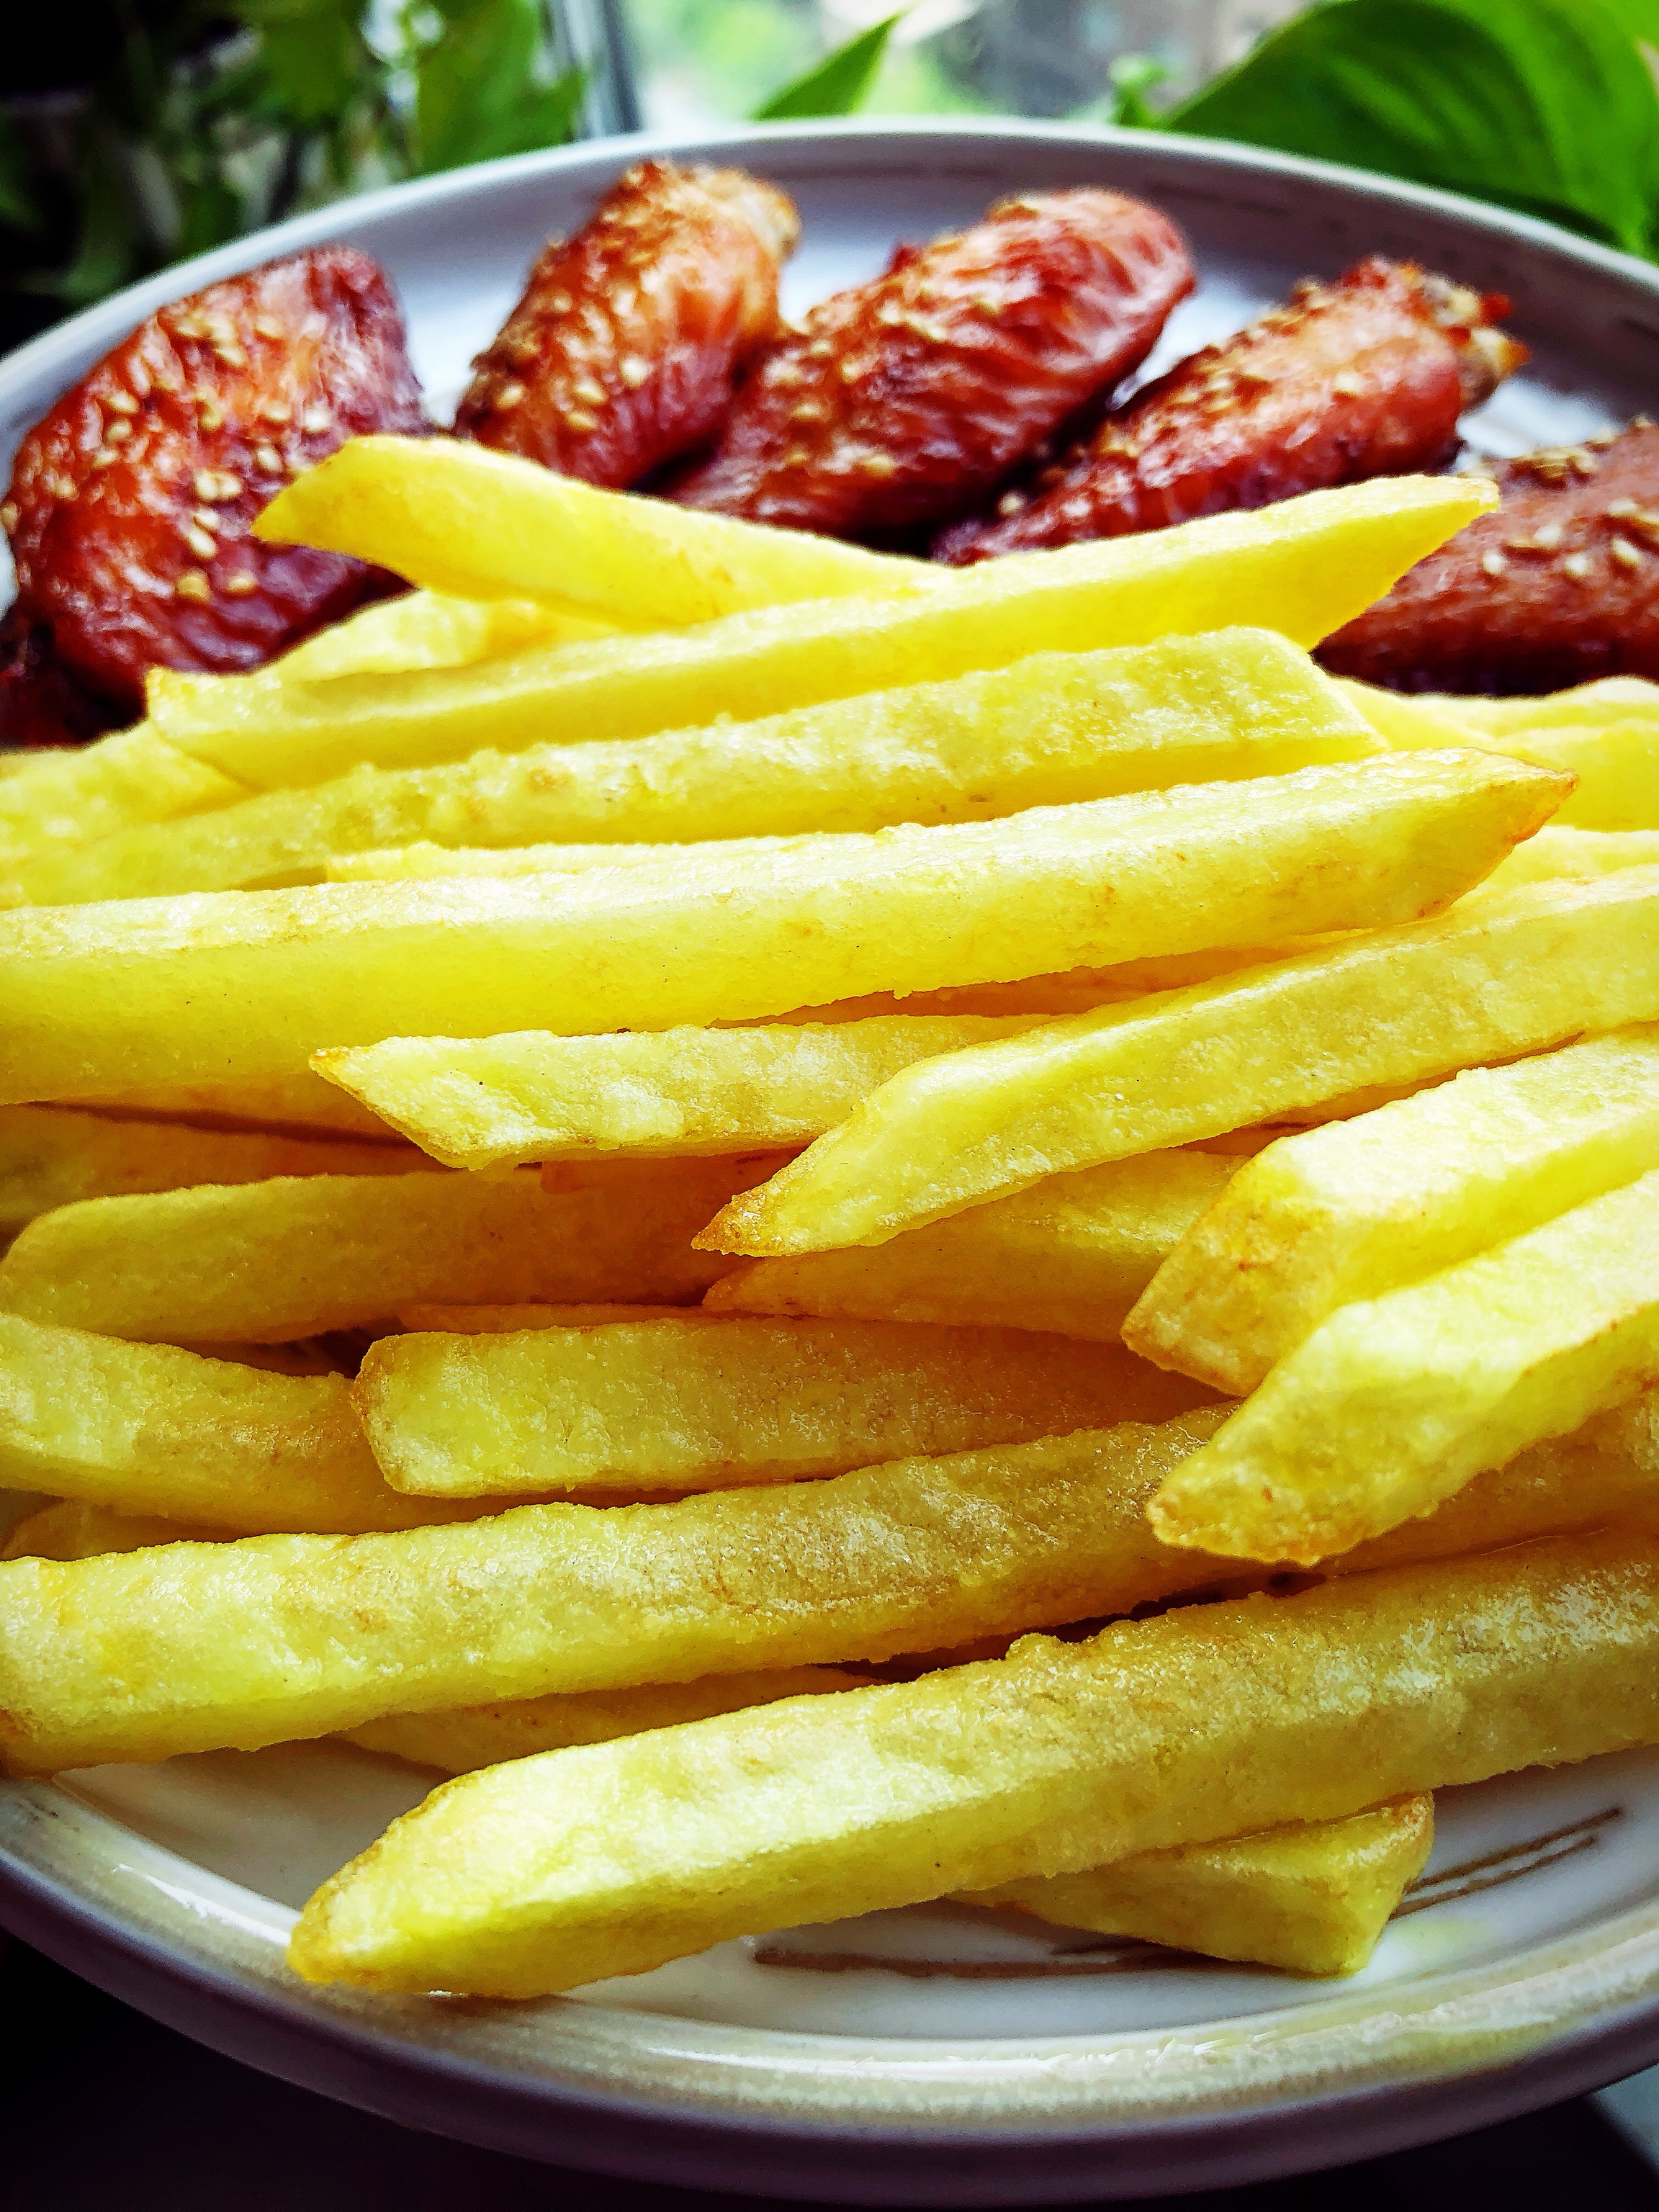 
Contain the method of chips, abstain chips how to be done delicious